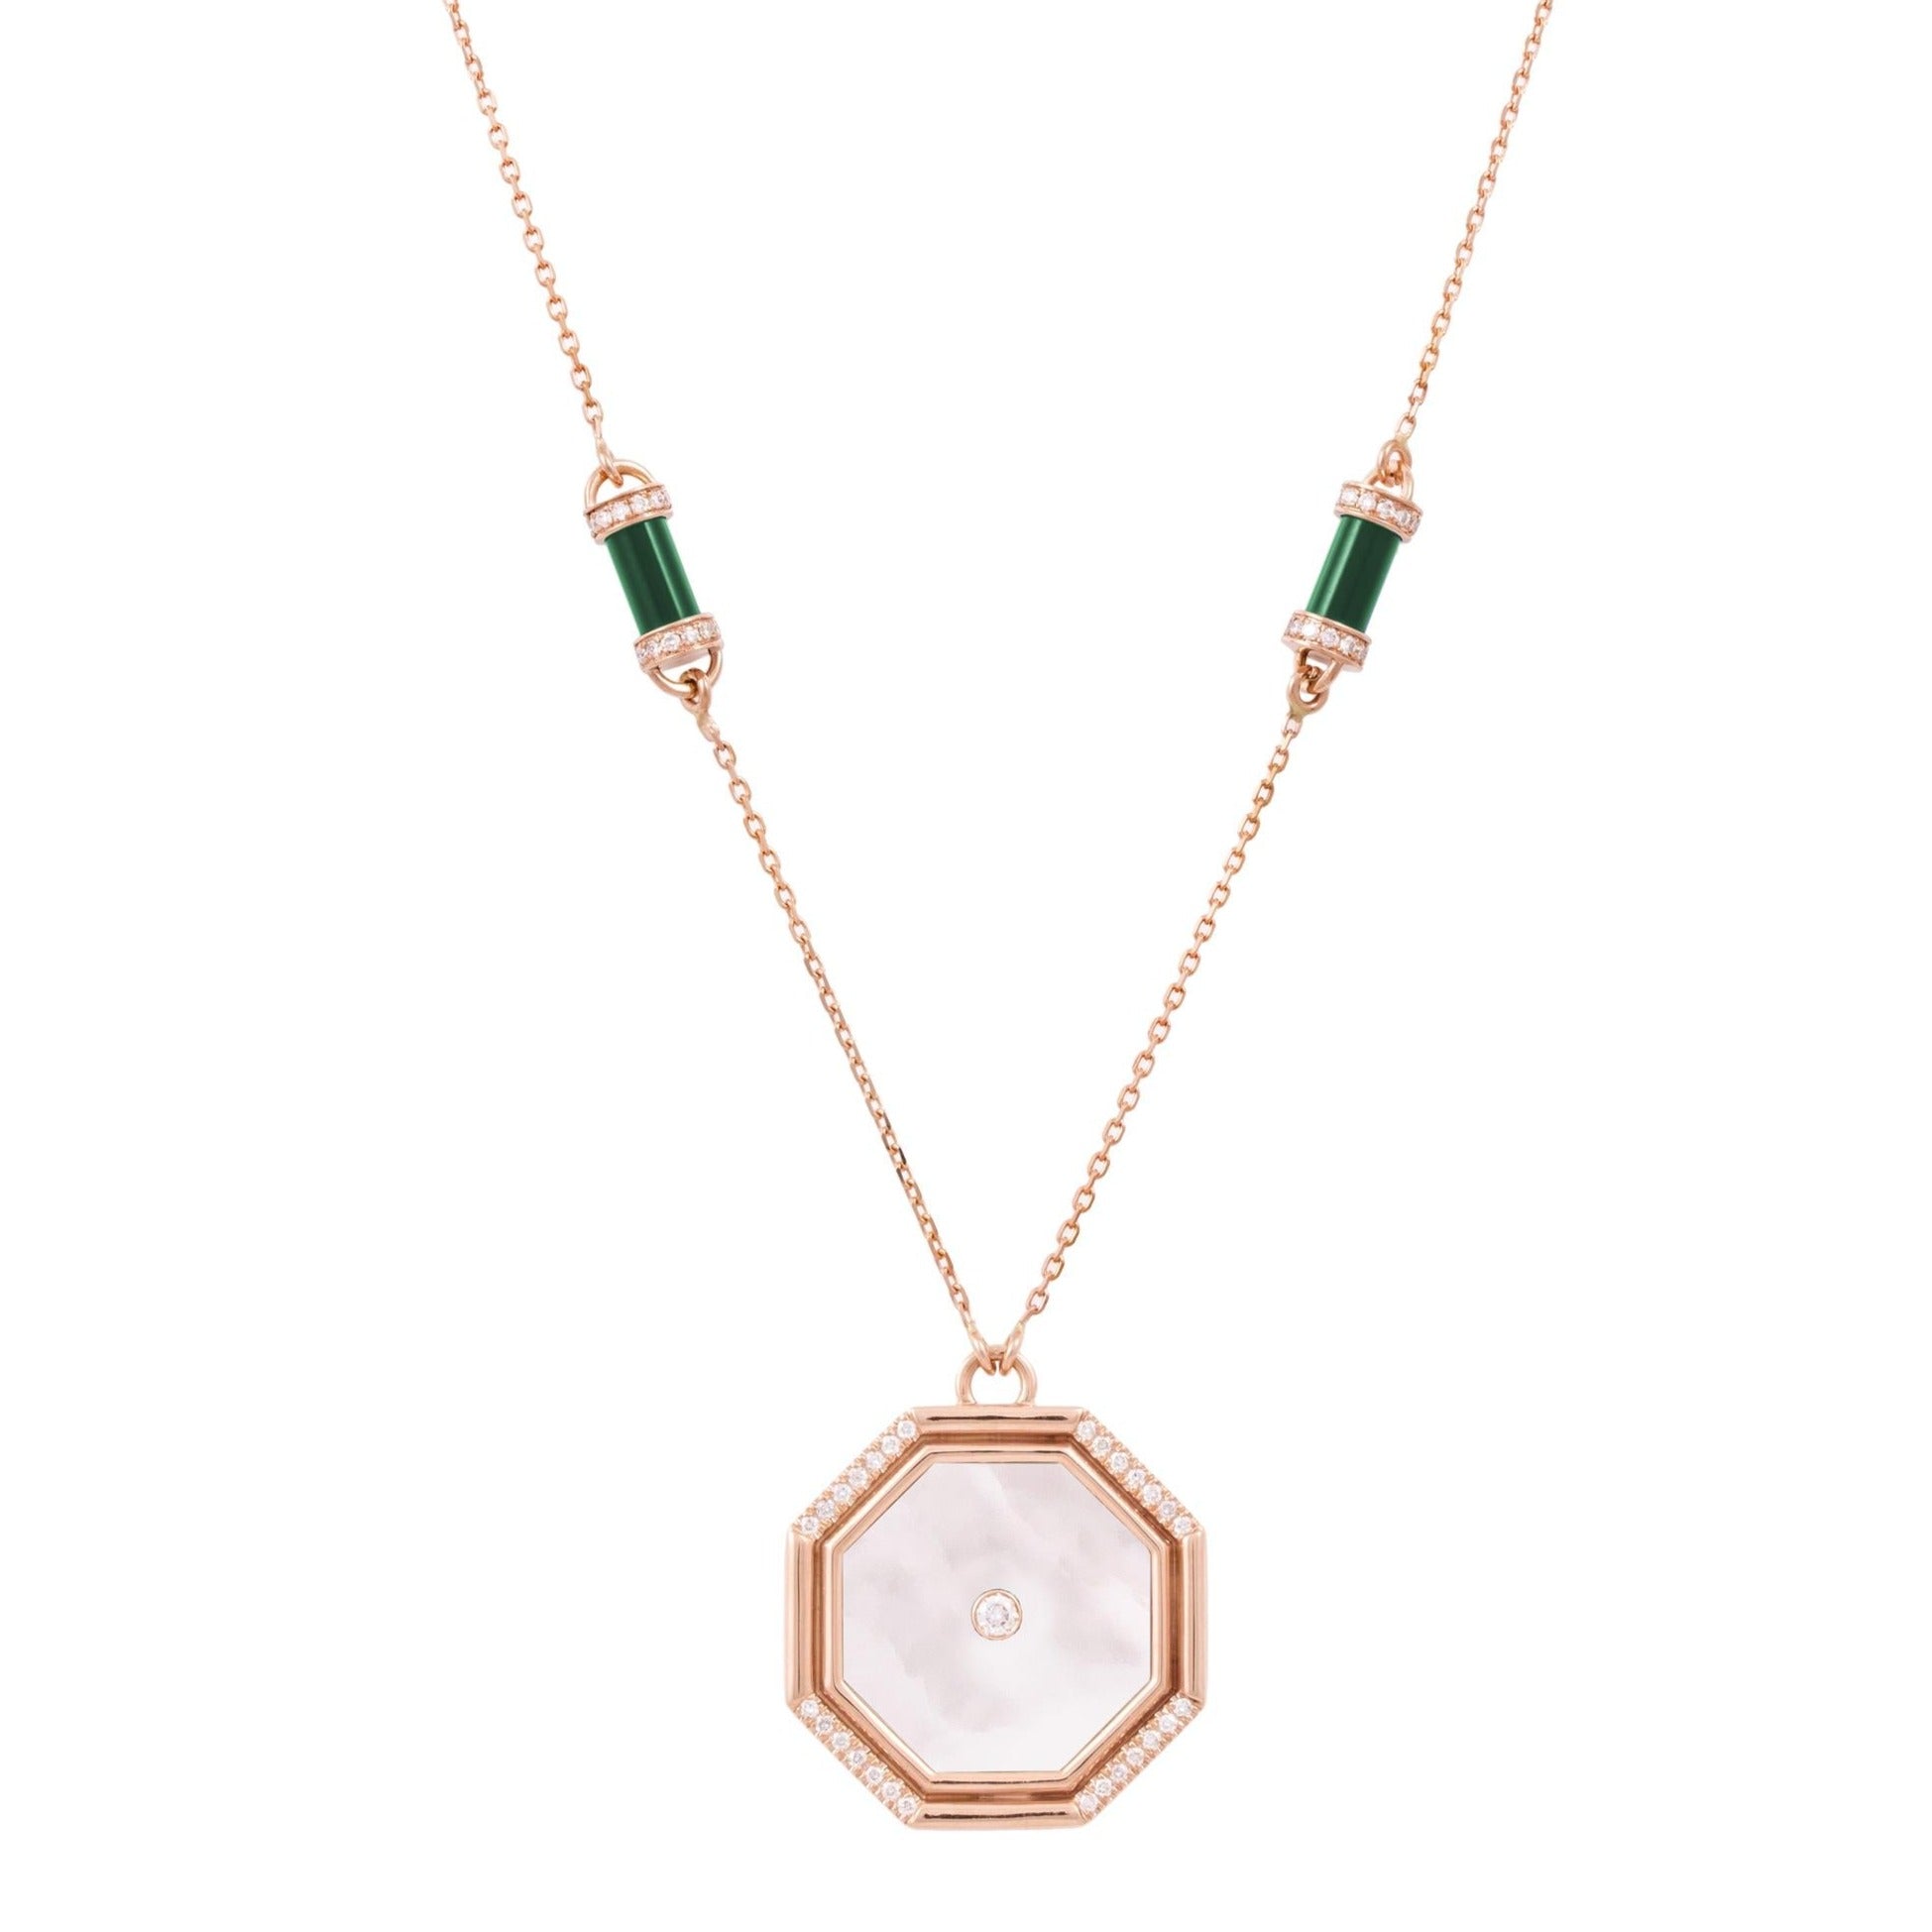 Hexagon Amulet Necklace, Mother of Pearl Pendant Latelier Nawbar Green  